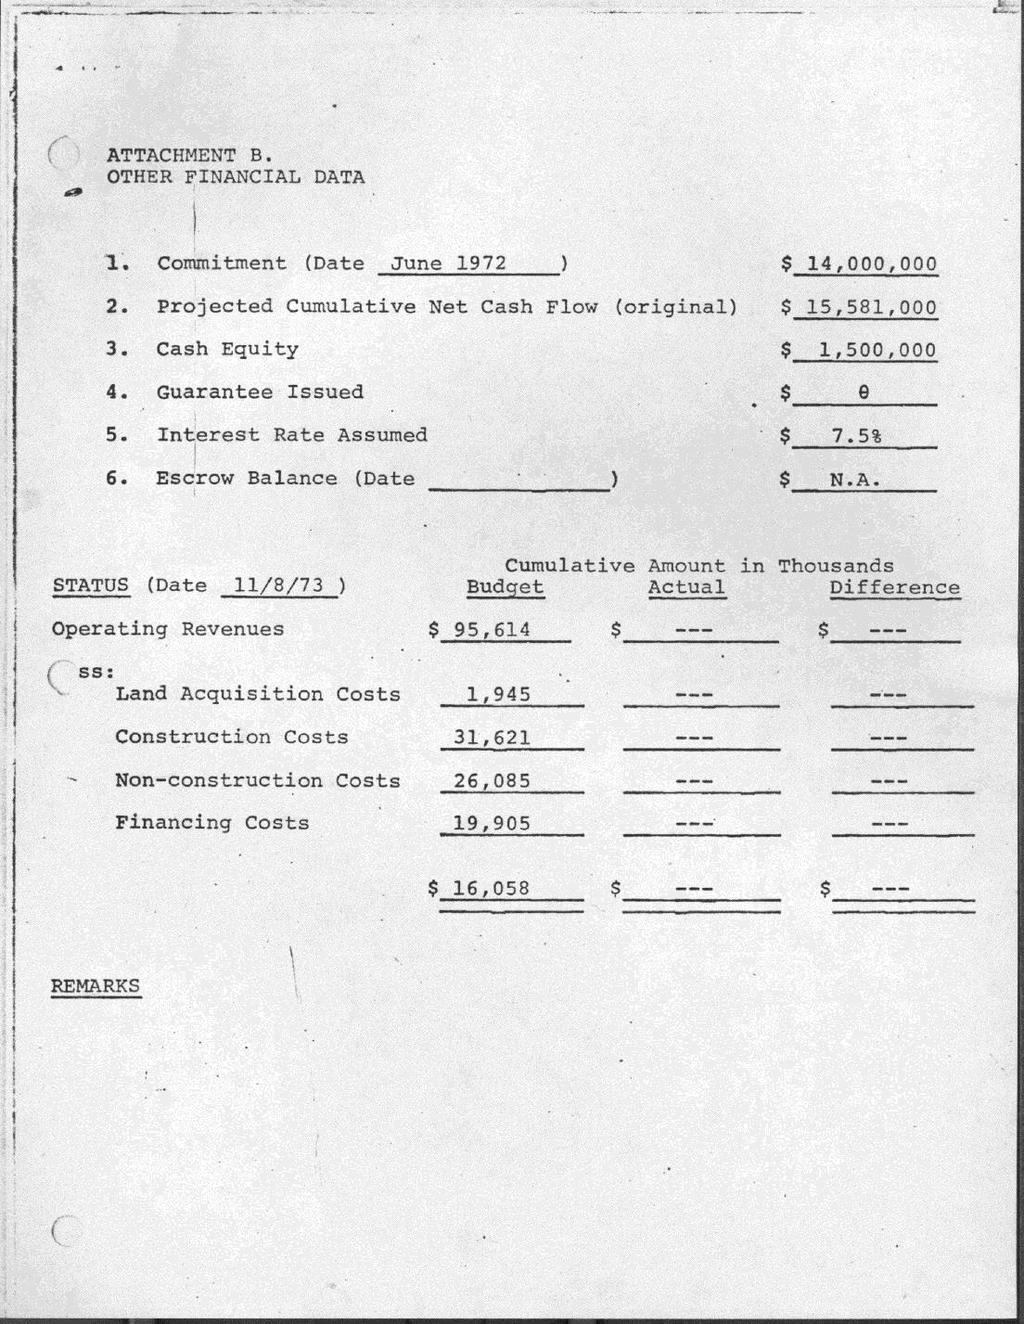 a ATTACHMENT B. OTHER FINANCIAL DATA 1. Commitment (Date June 1972 ) $_ 14,000,000 2. Projected Cumulative Net Cash Flow (original) $_ 15,581,000 3. Cash Equity $ 1,500,000 4. Guarantee Issued $ 0 5.